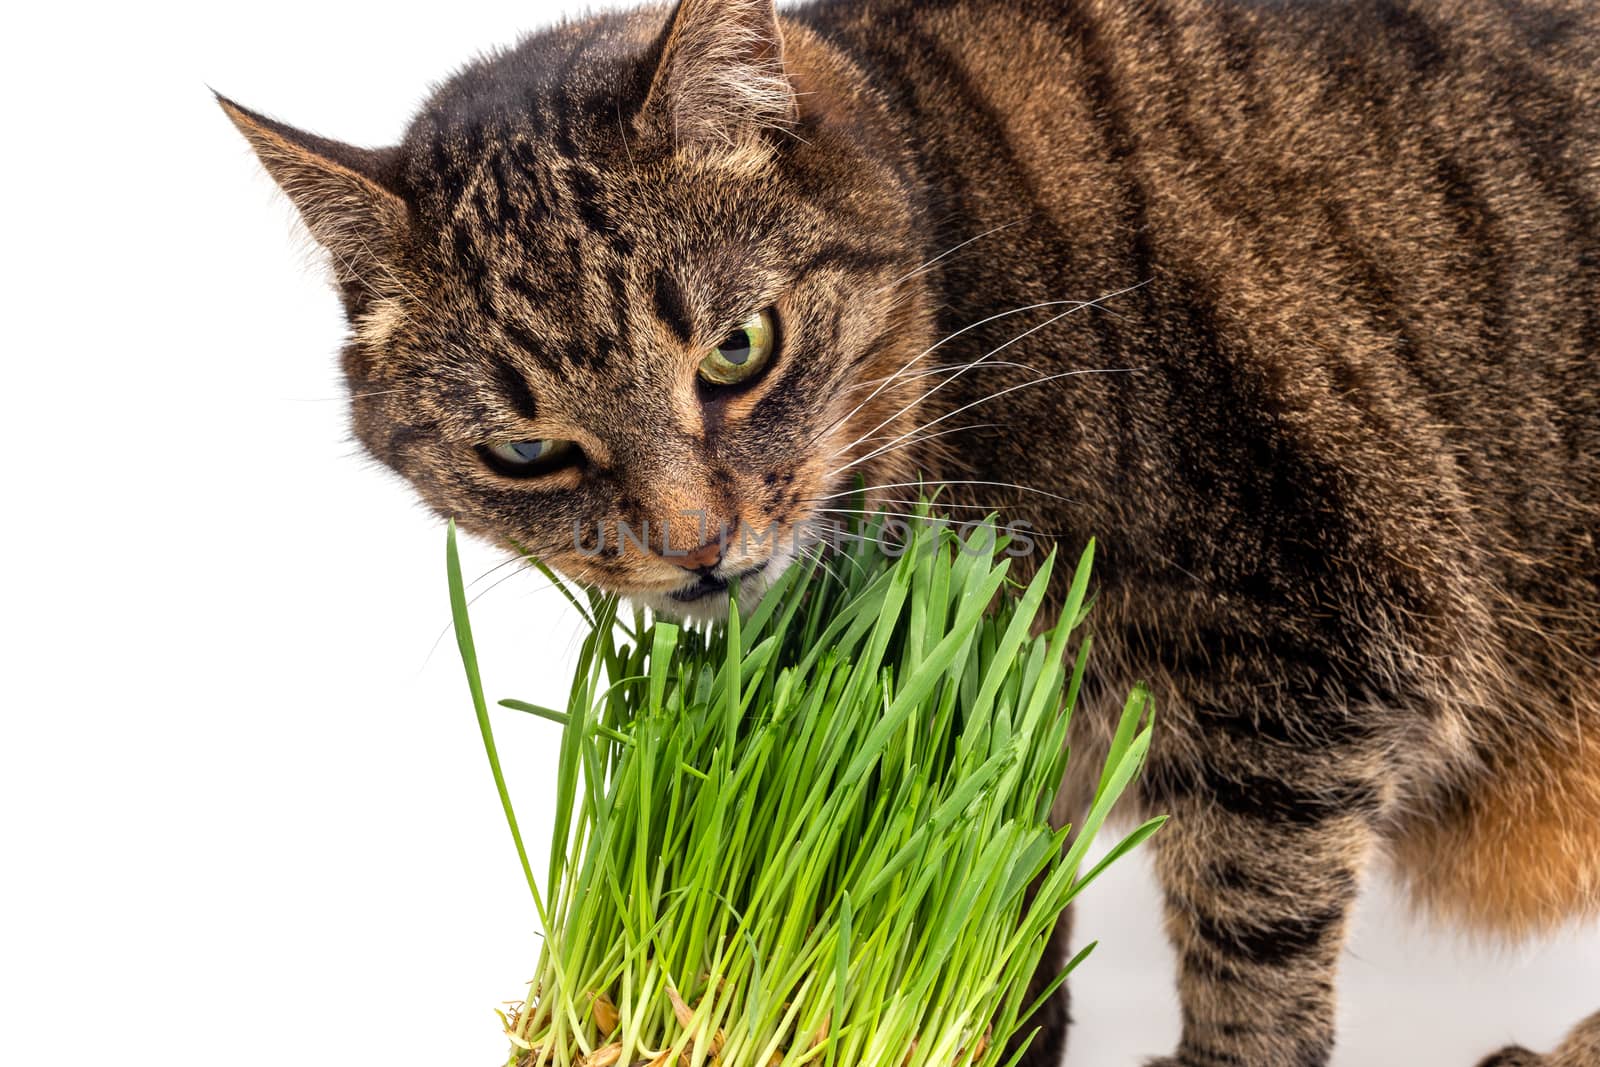 yellow eyed tabby cat eating fresh green grass close-up on white background with selective focus and blur by z1b